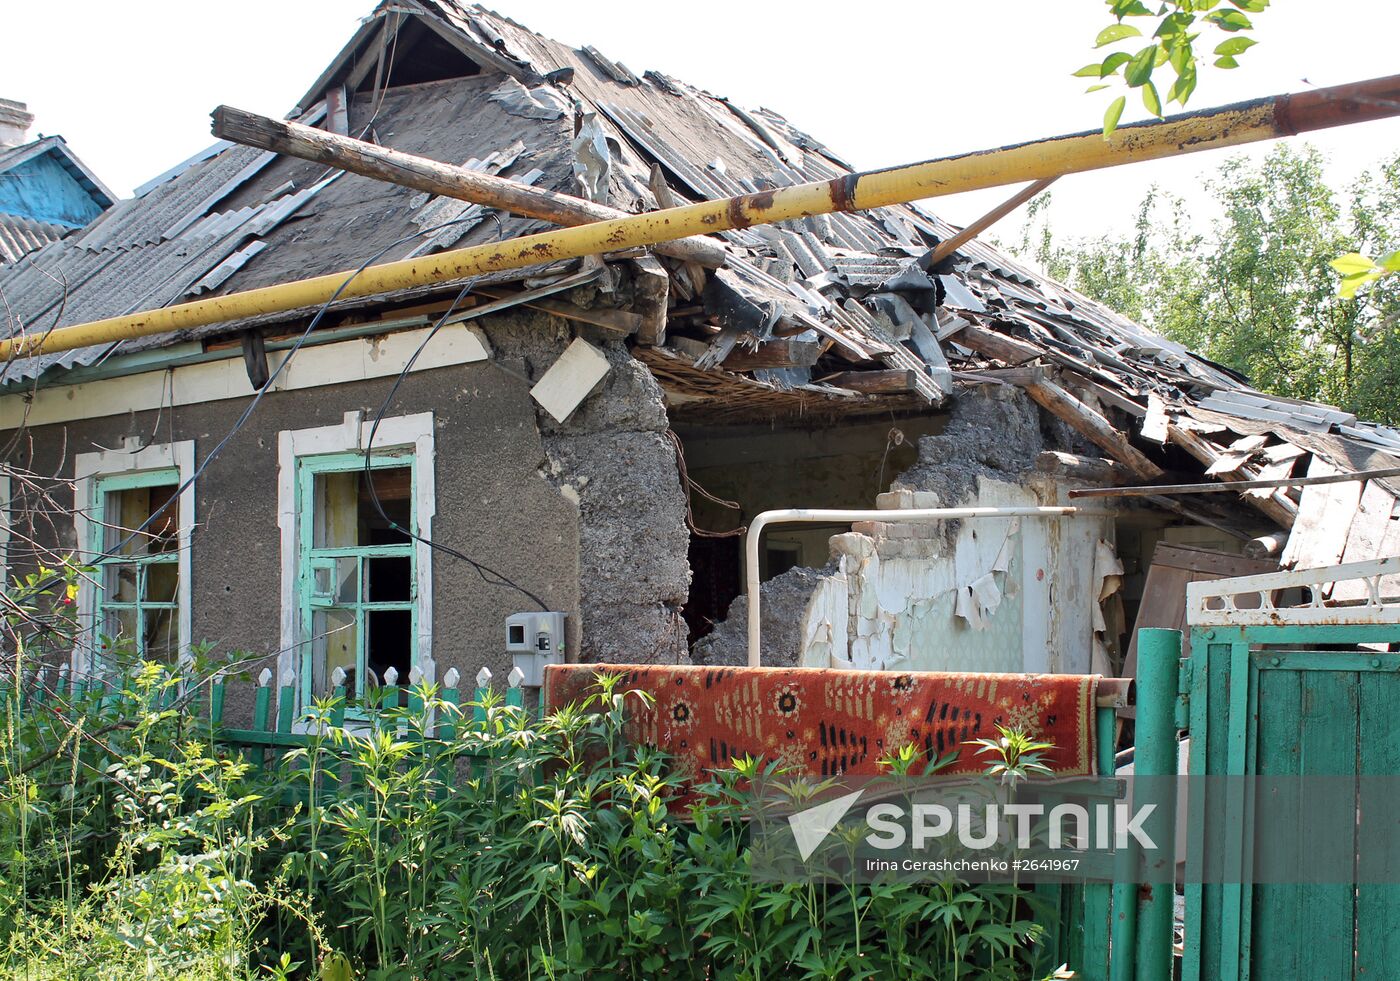 Aftermath of Donetsk shelling by Ukrainian army